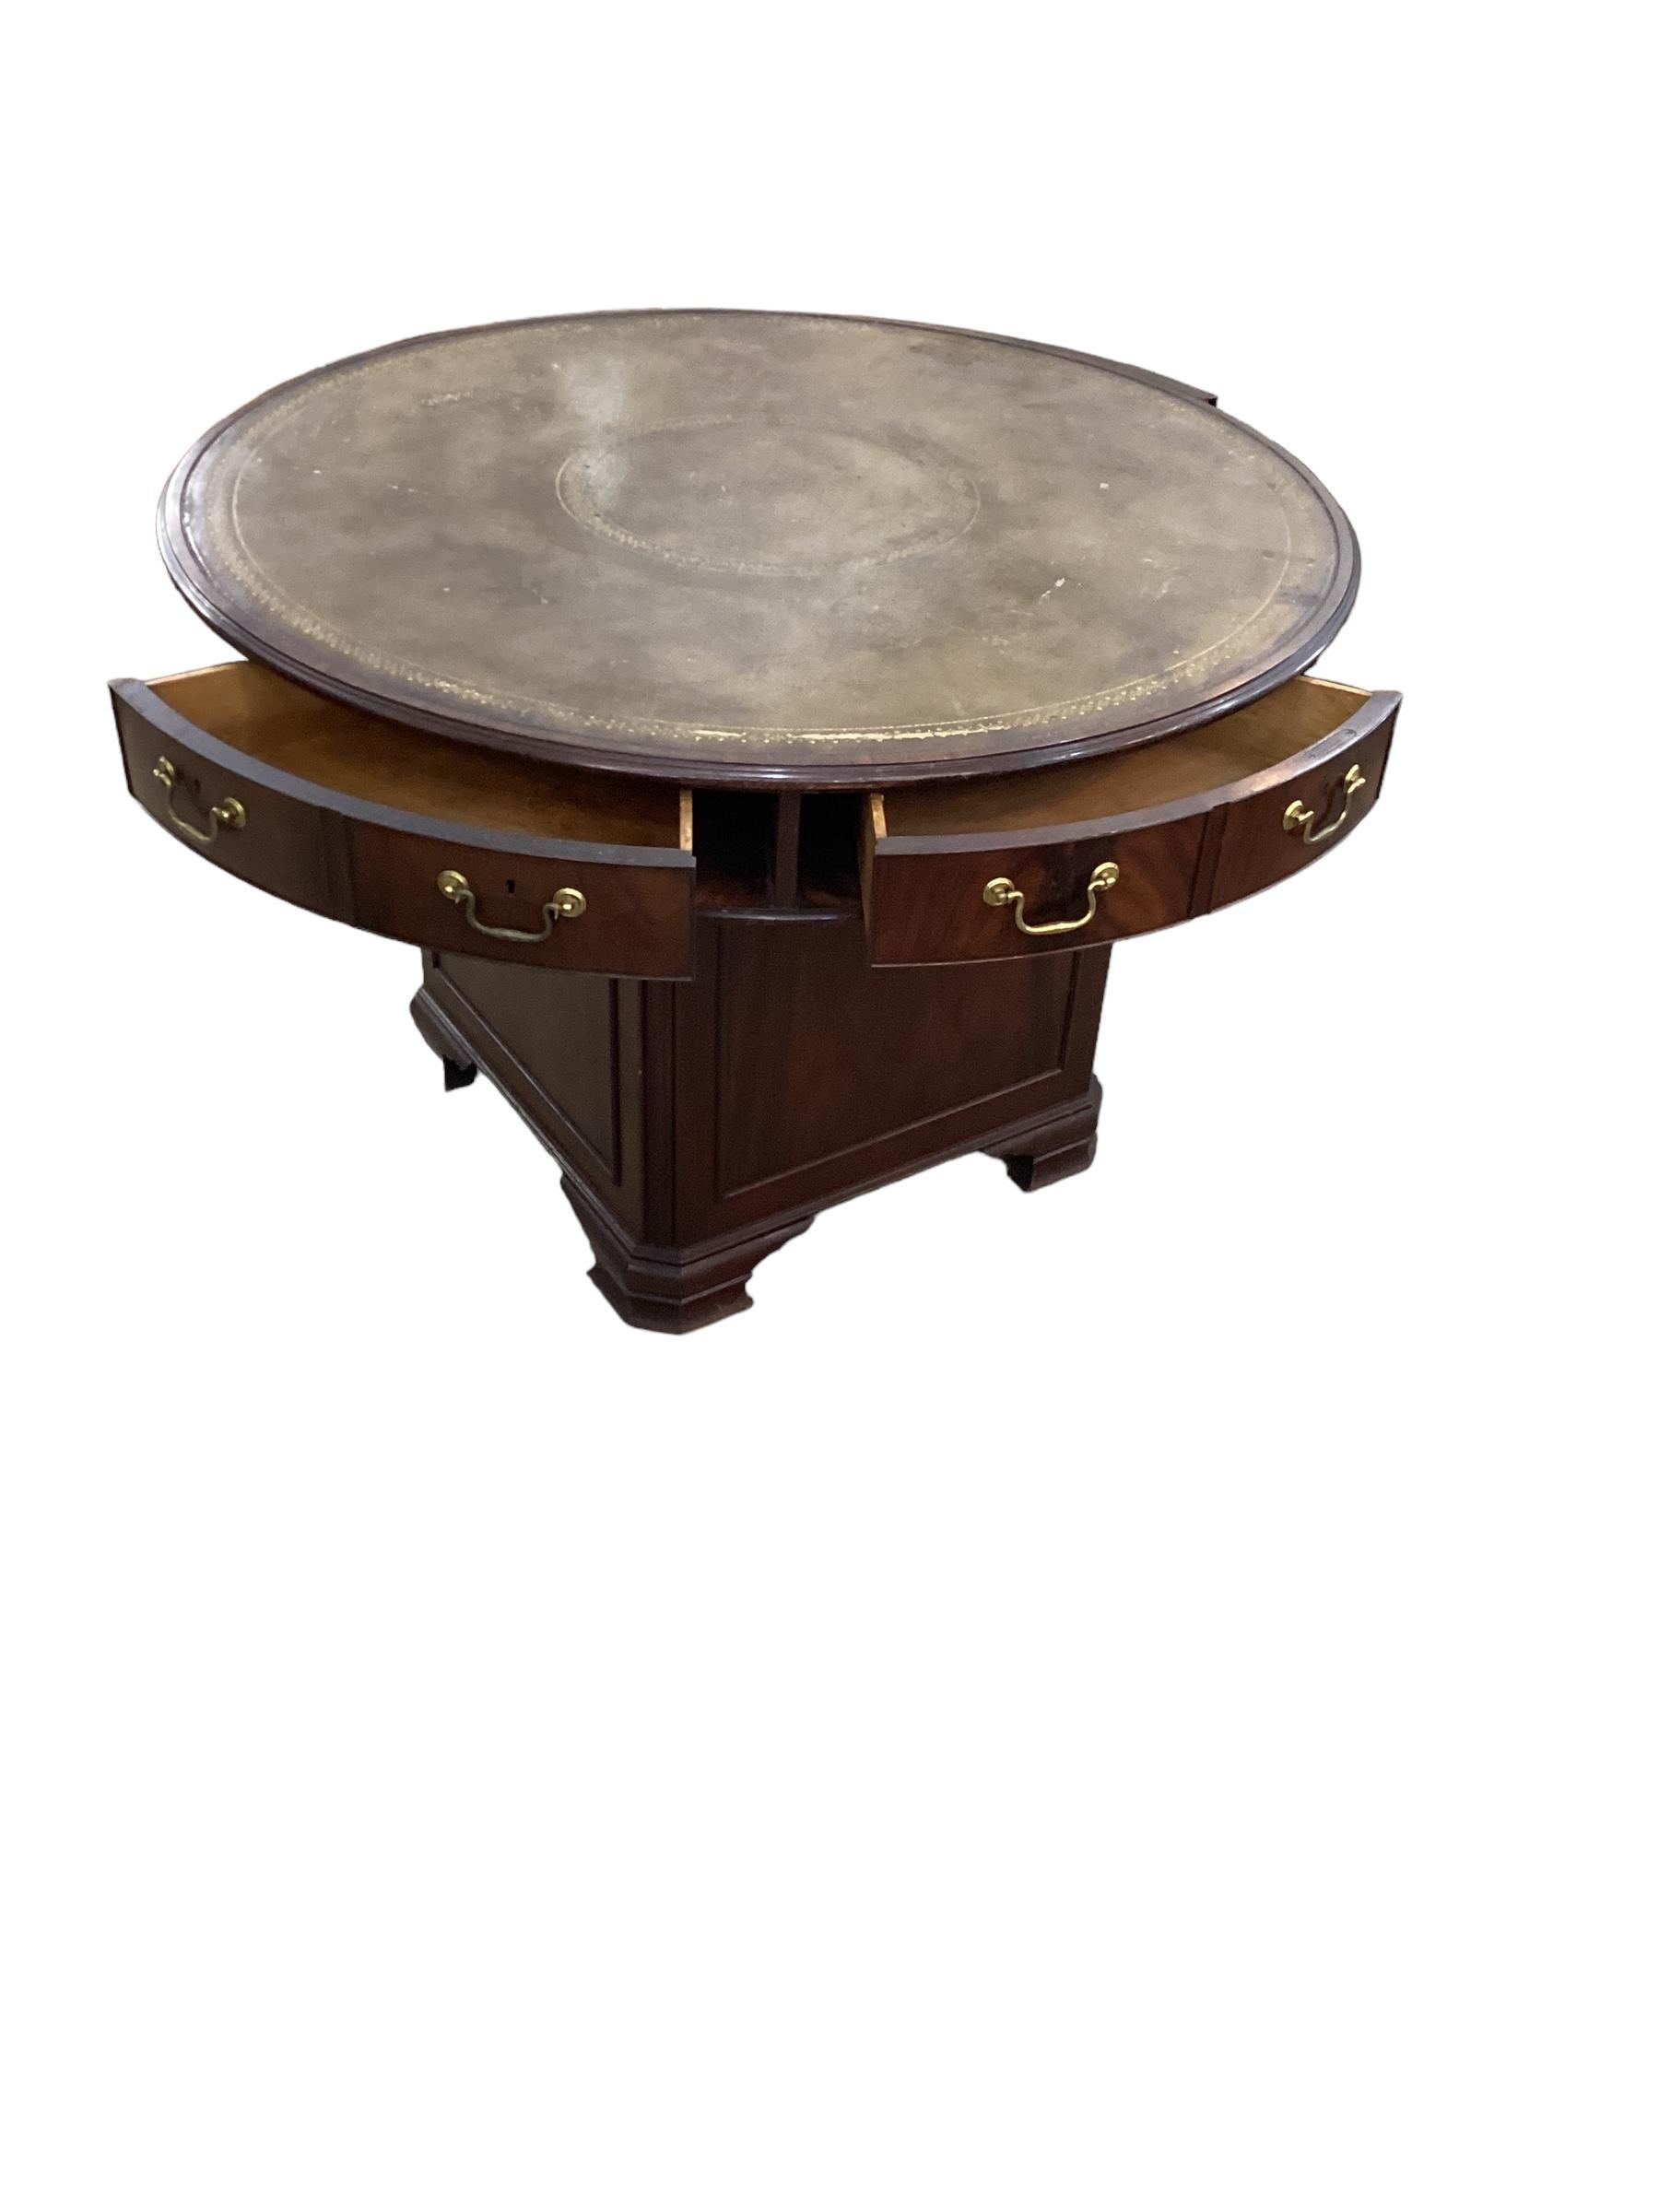 Antique Mahogany Leather Top Rent Drum Table. The to fitted with six wedge shaped drawers. The base has a storage compartment that has a lock to keep valuable safe and each drawer also has a functional lock. Flame mahogany construction with brass